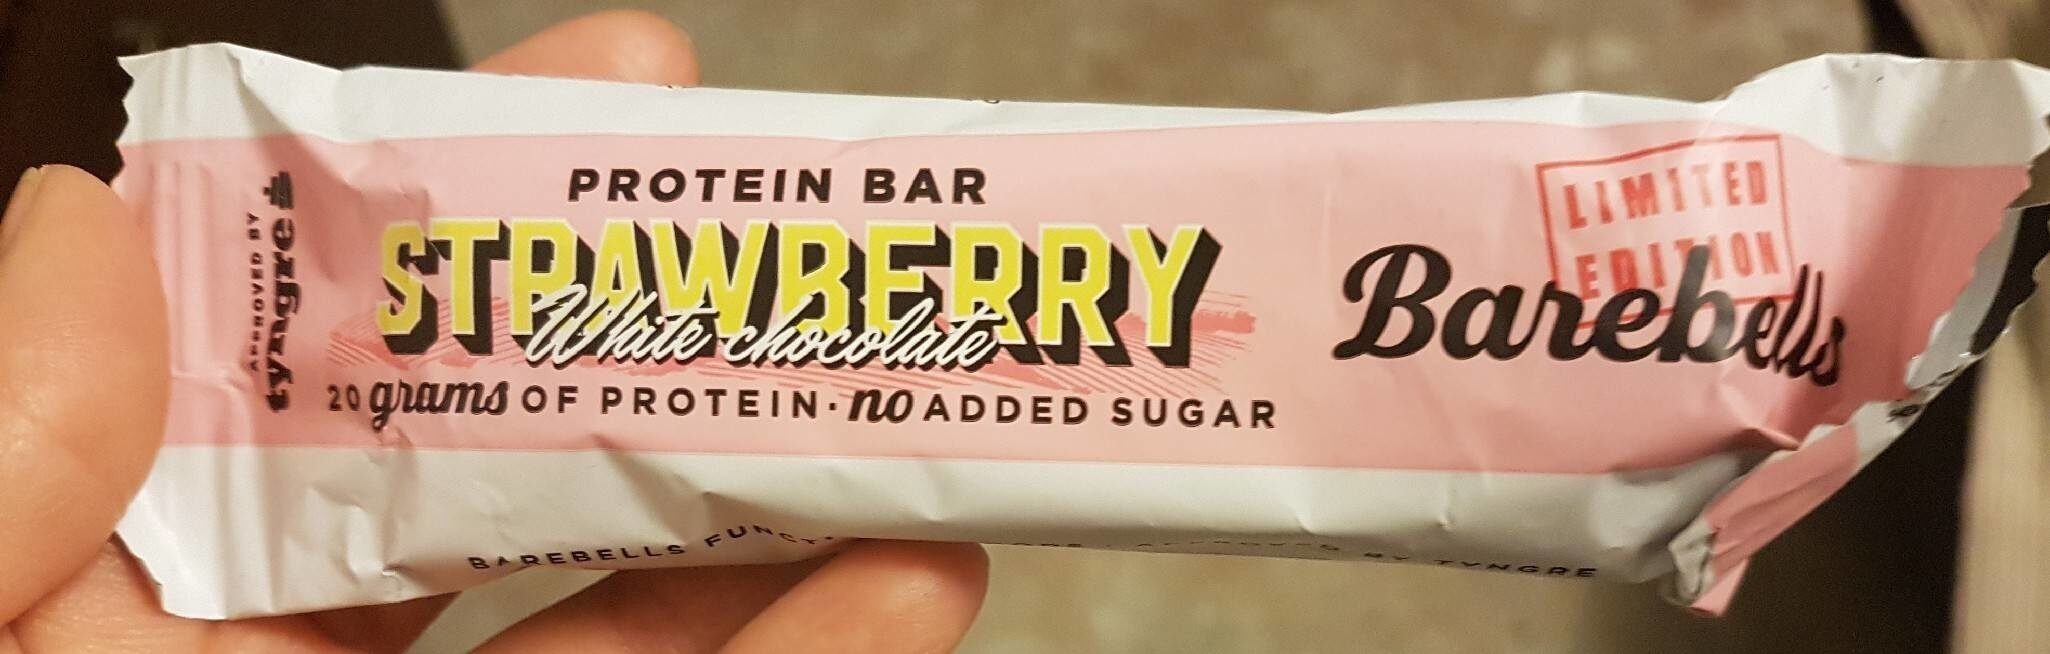 Strawberry & white chocolate protein bar - Product - fr